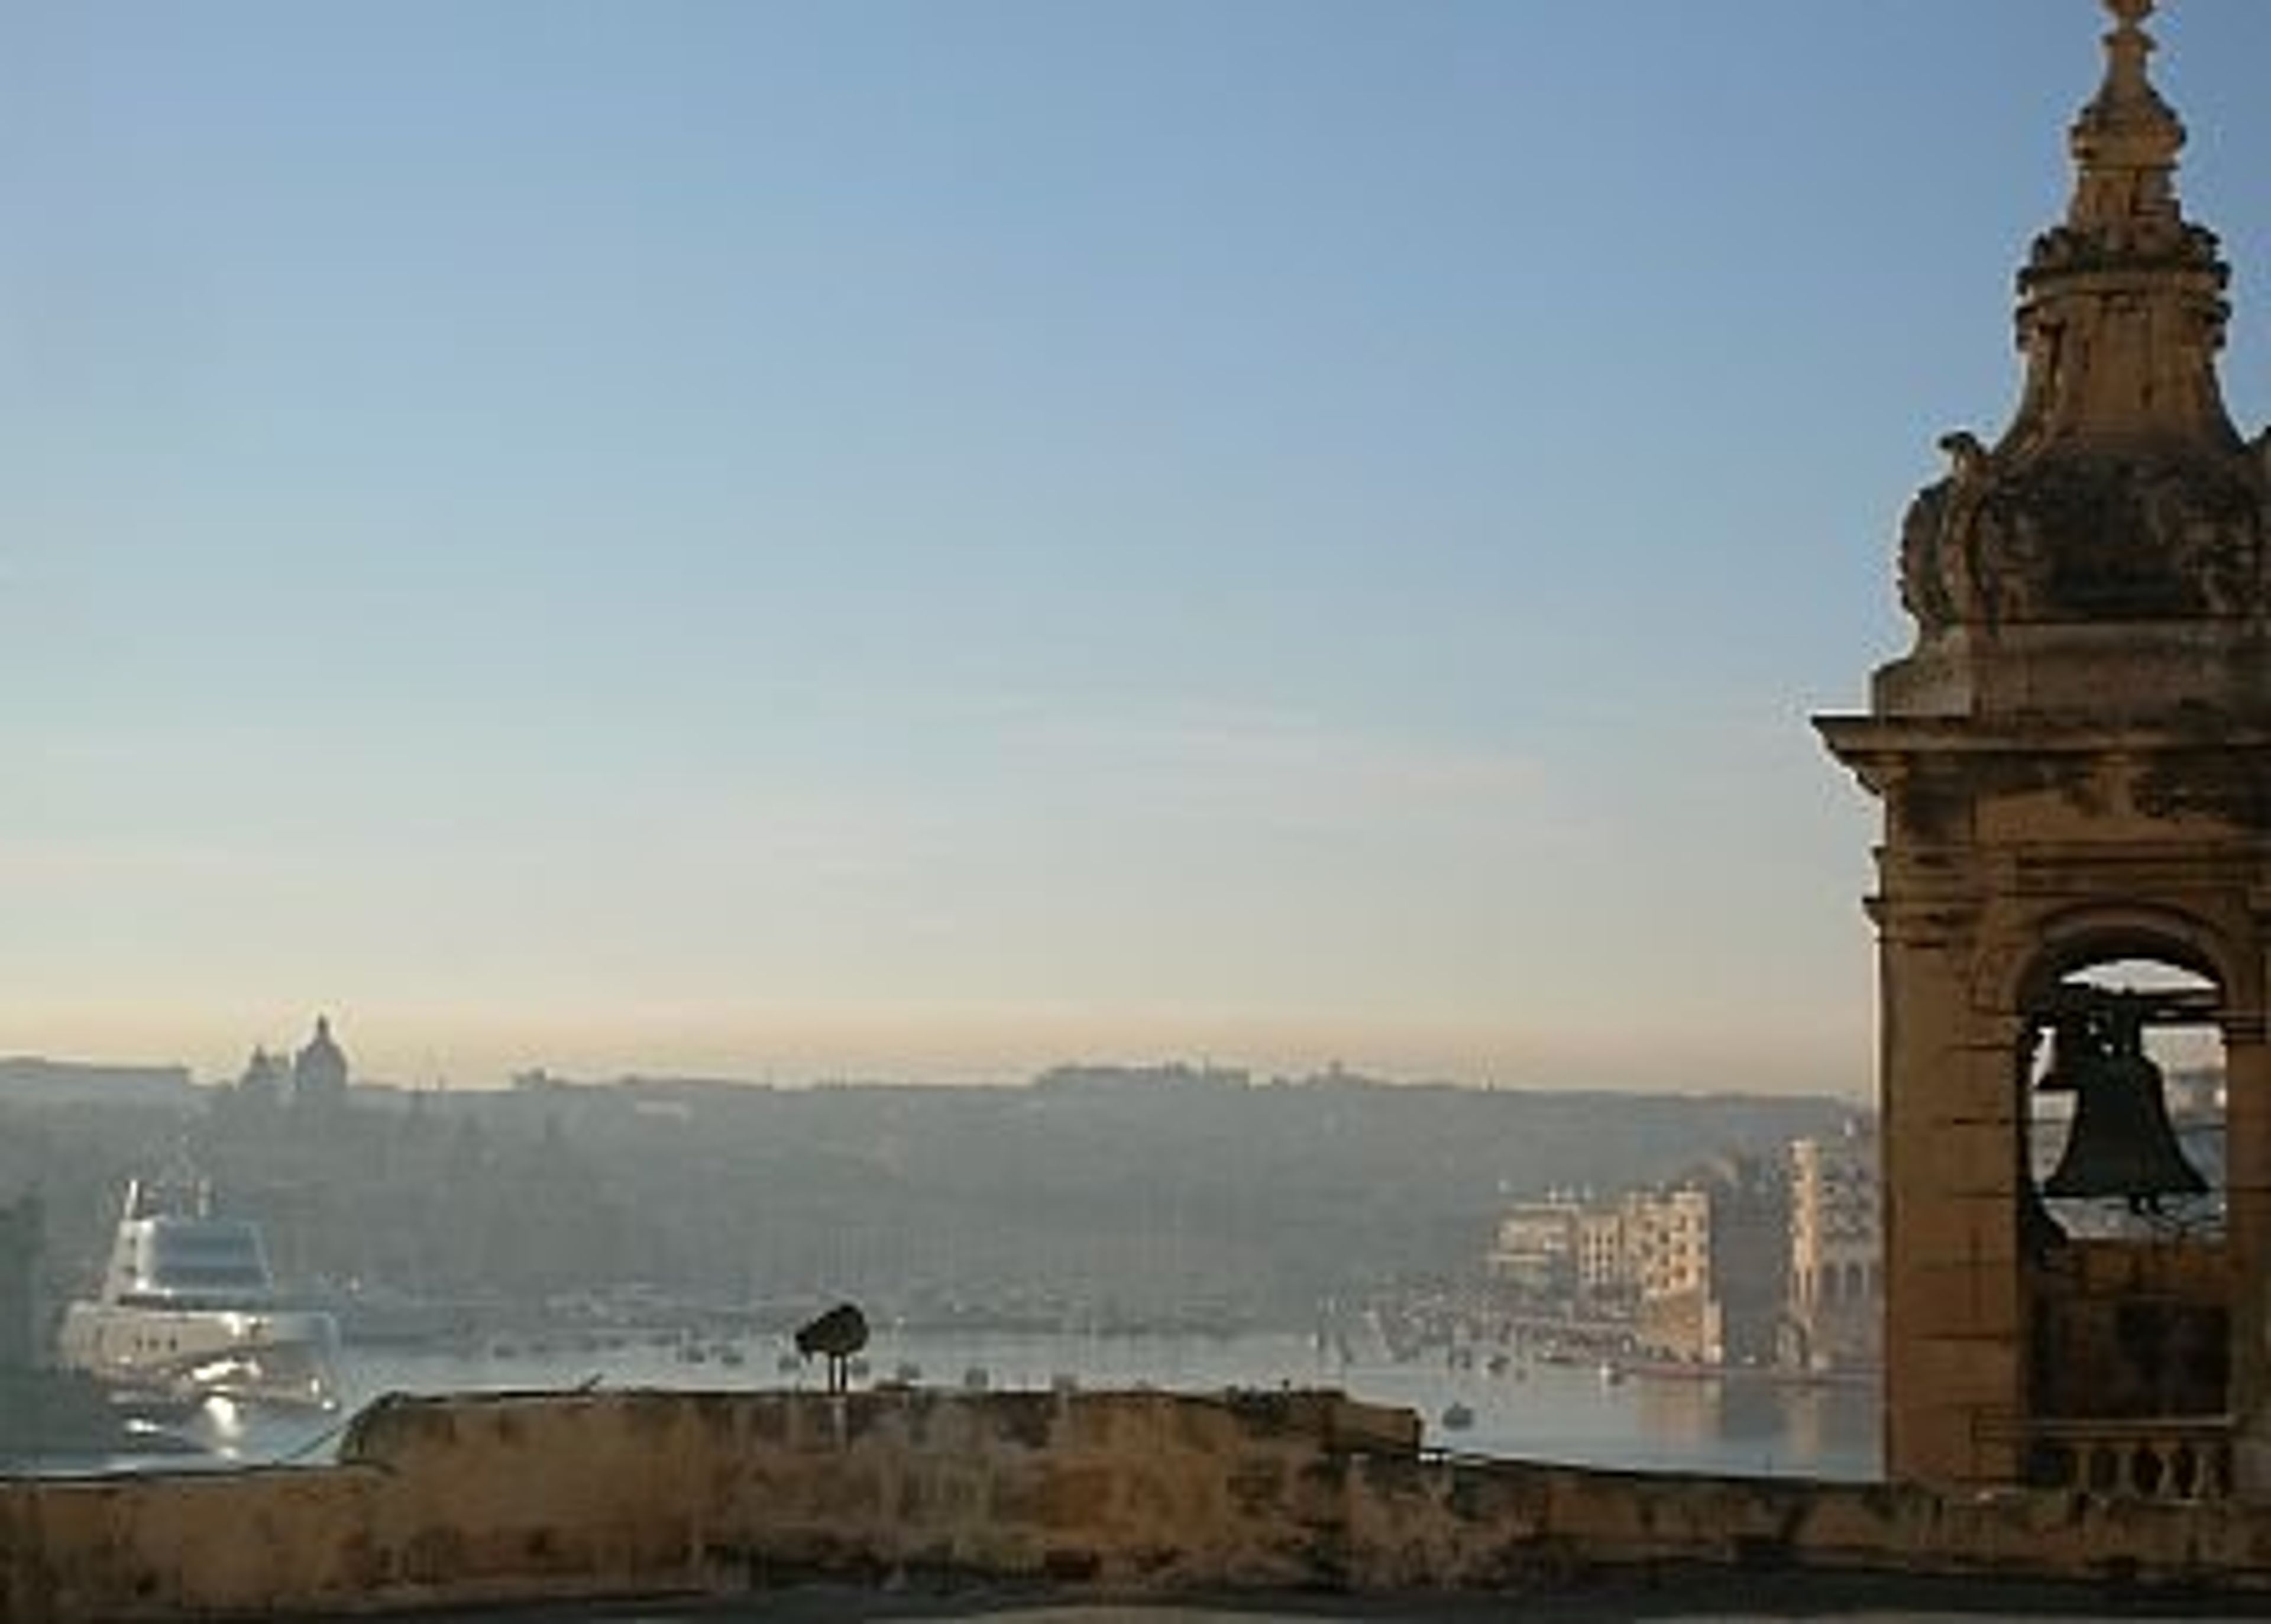 View of the Three Cities from balcony